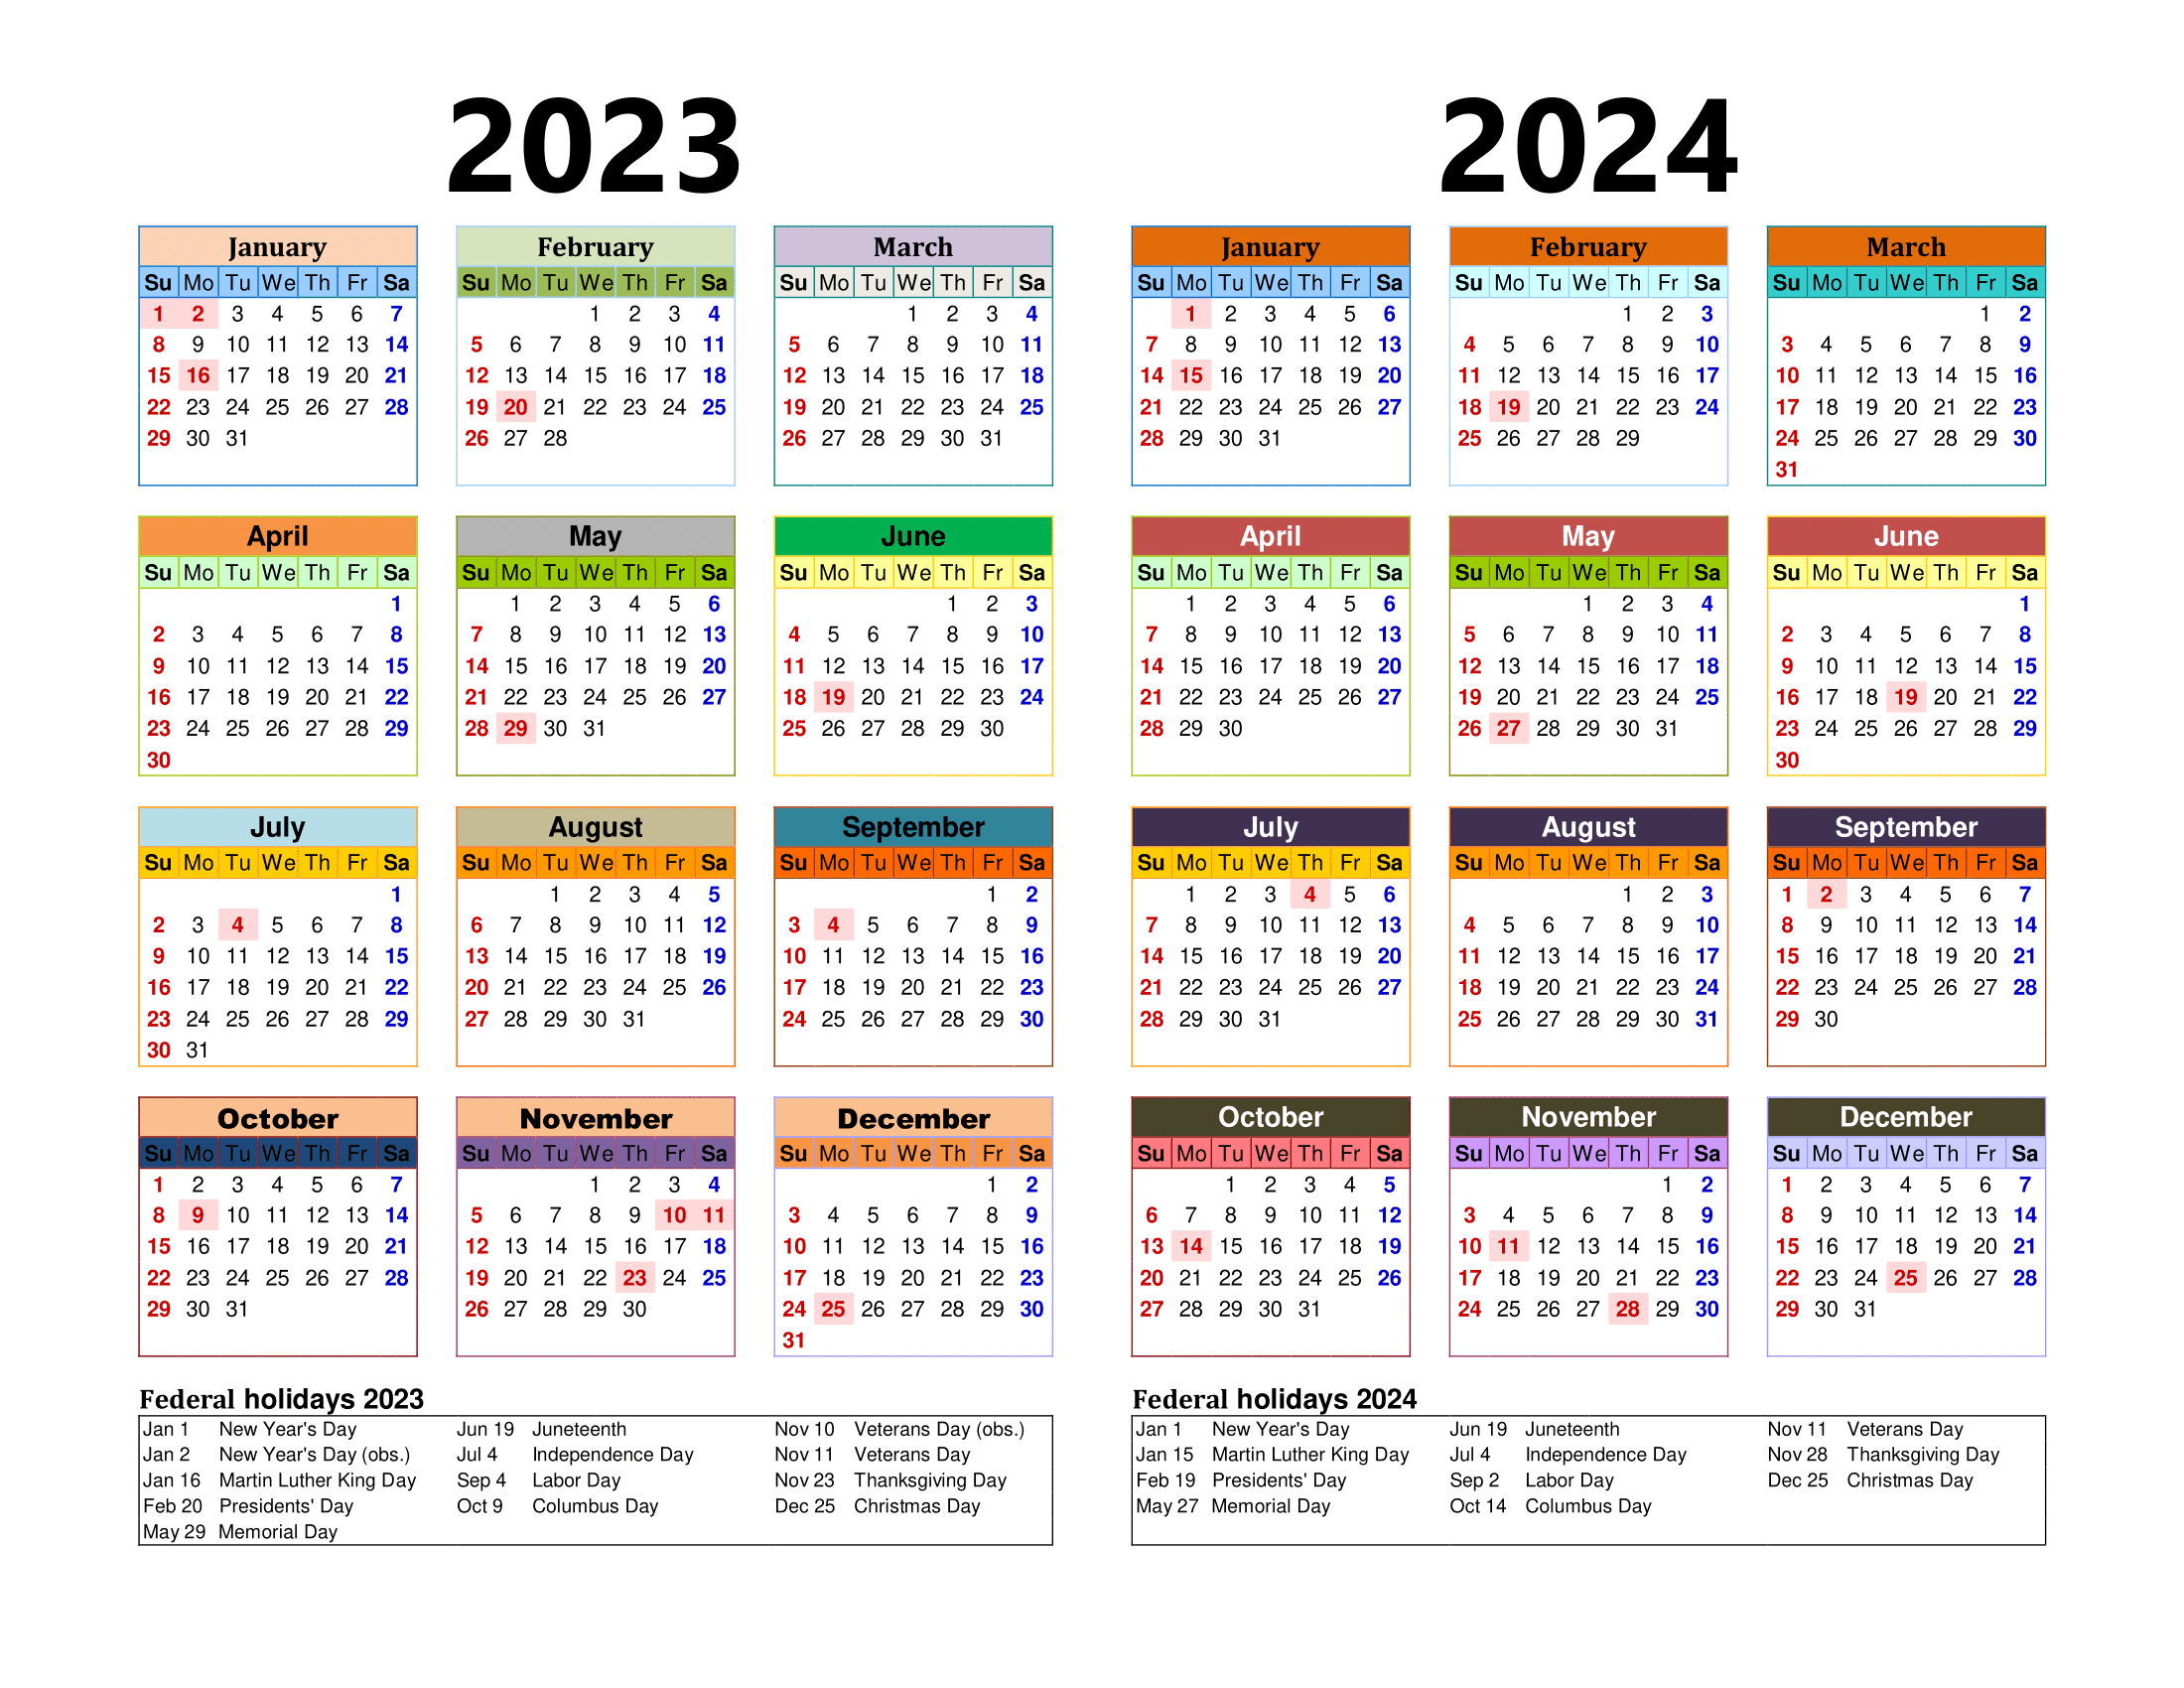 Free Printable Two Year Calendar Templates For 2023 And 2024 In Pdf for 2023 And 2024 Calendar With Holidays Printable